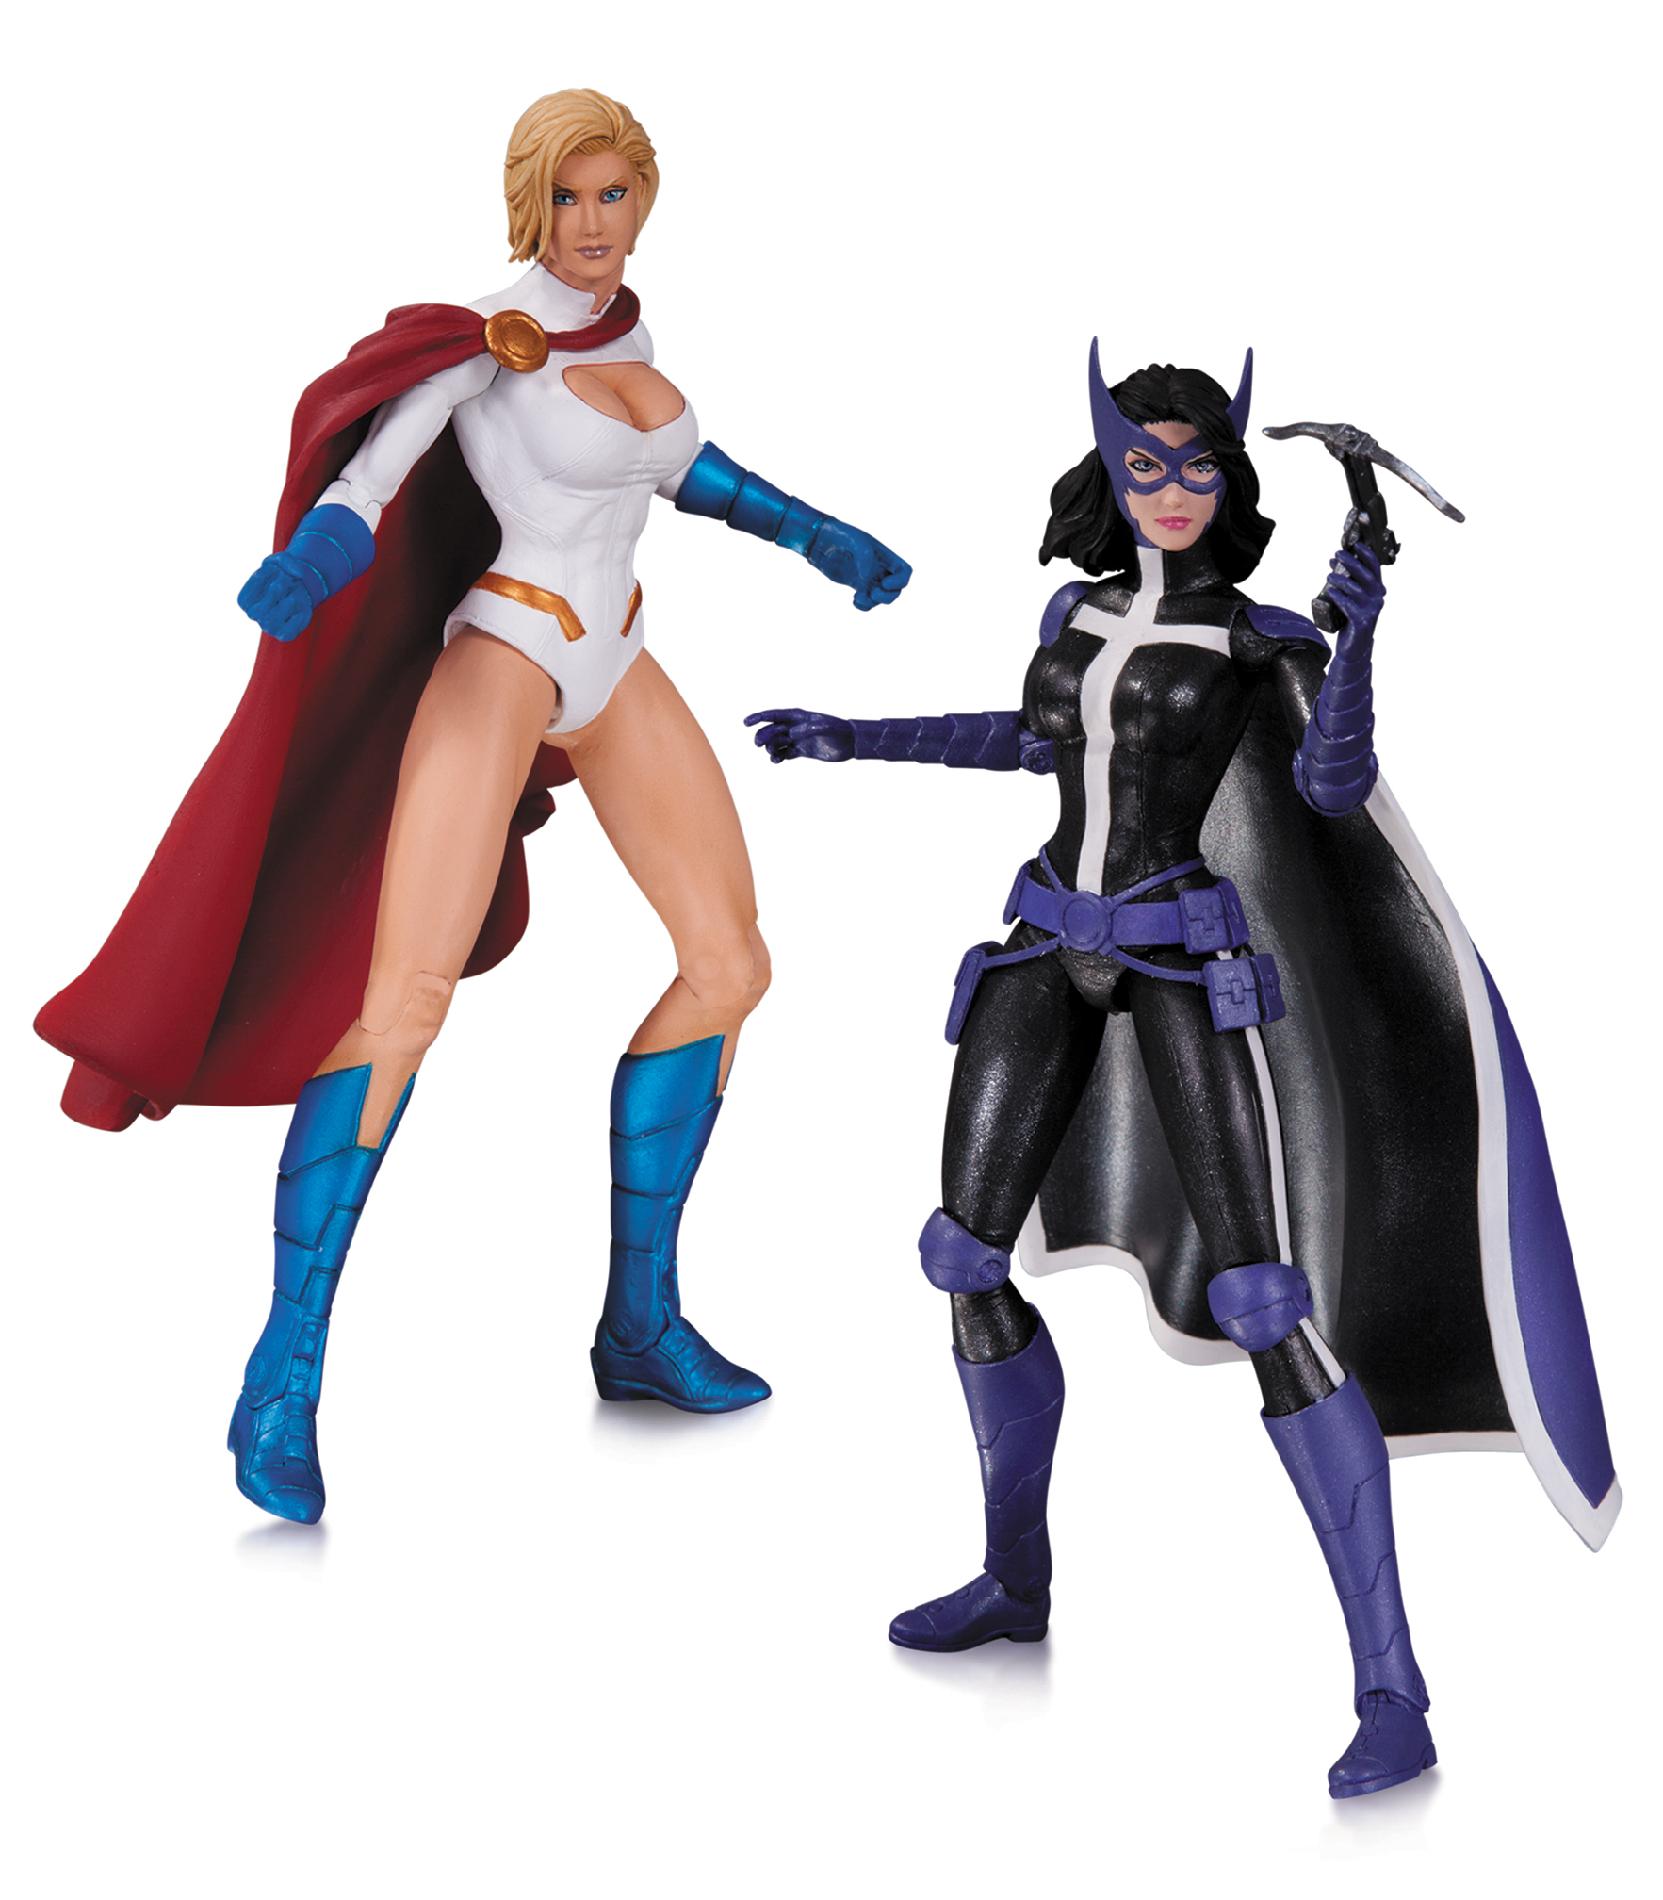 New 52 Powergirl & Huntress Action Figure 2 Pack